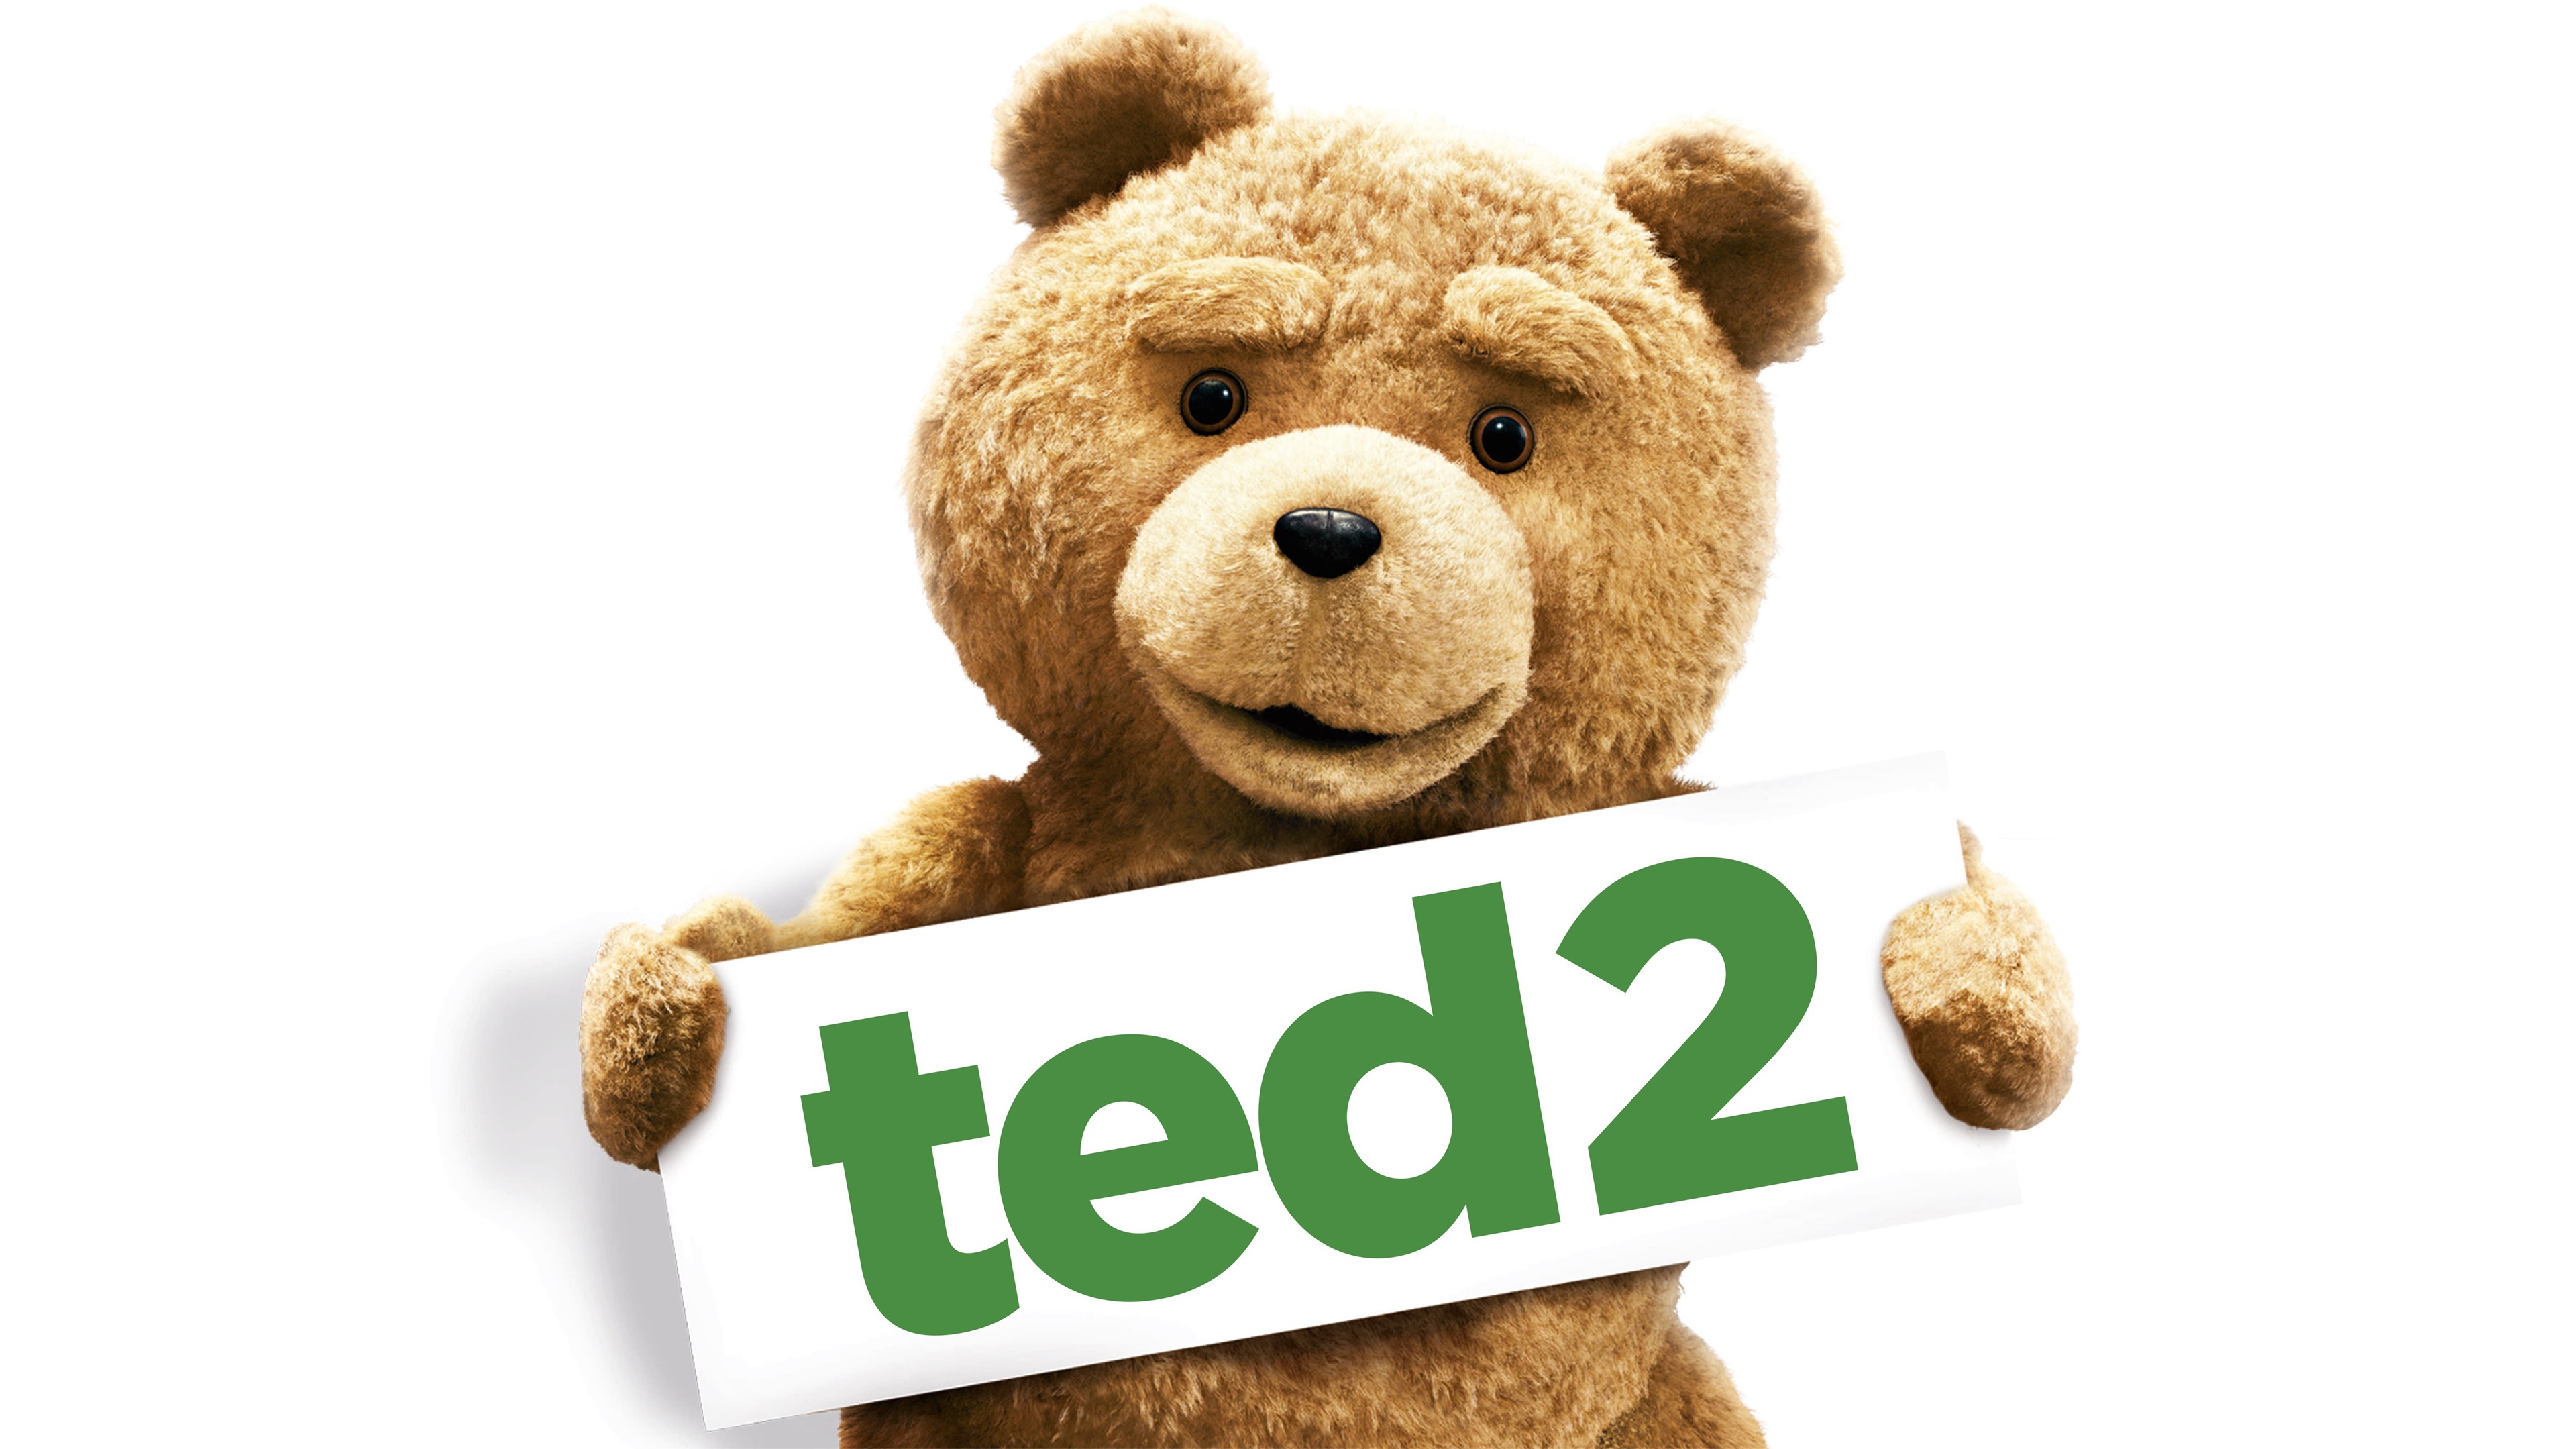 2015_ted_2_movie-3840x2160